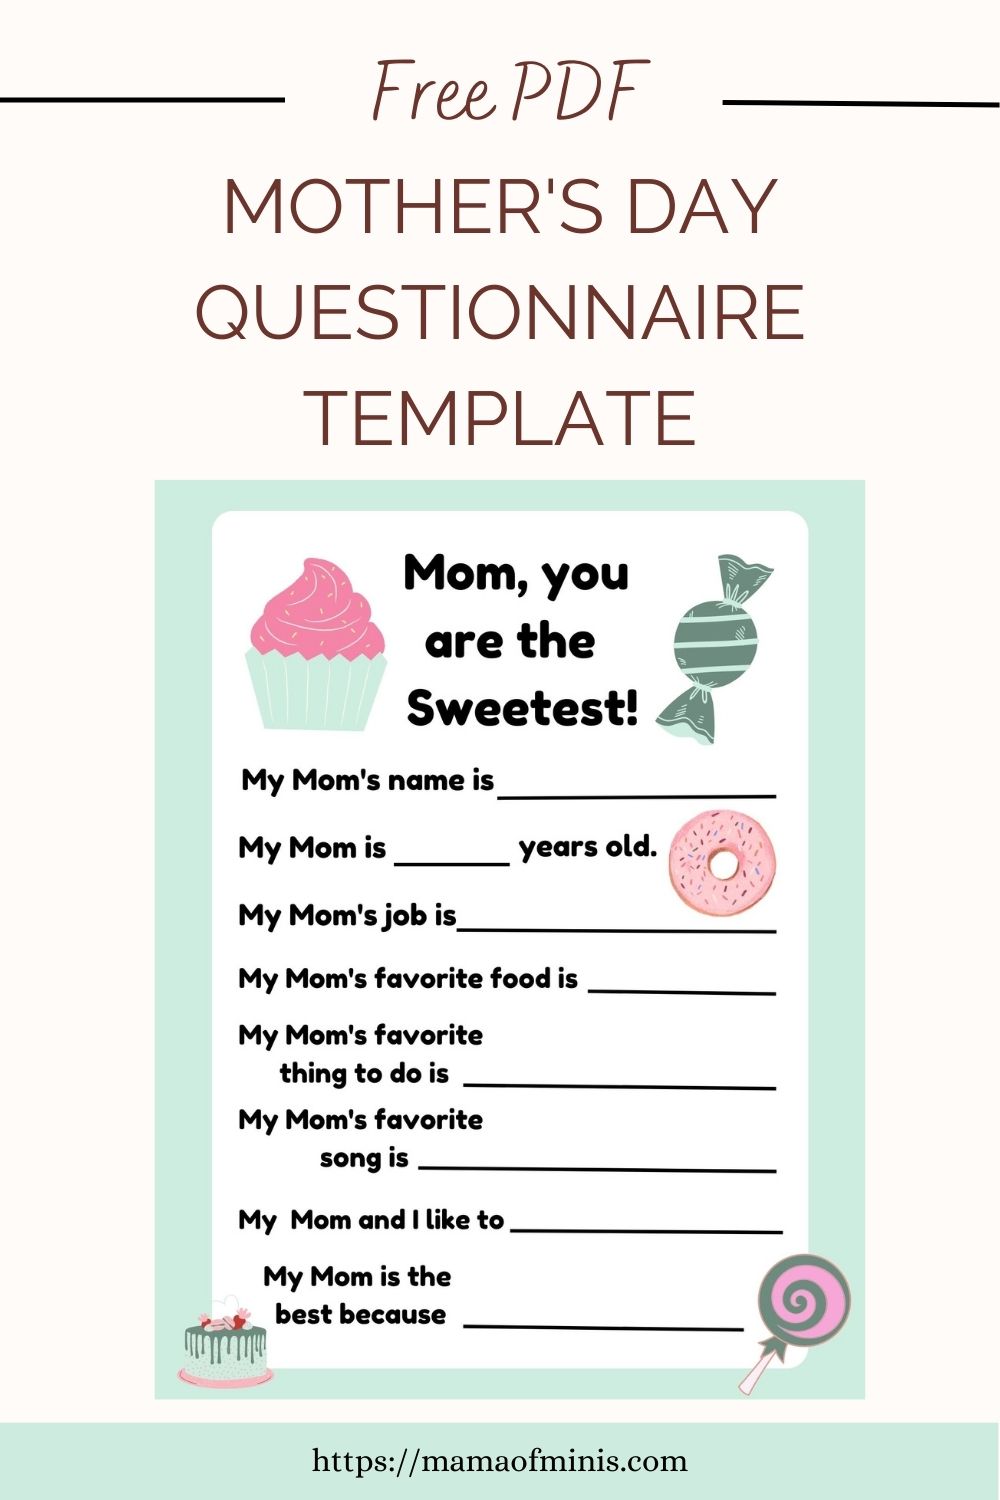 Free PDF Mother's Day Template